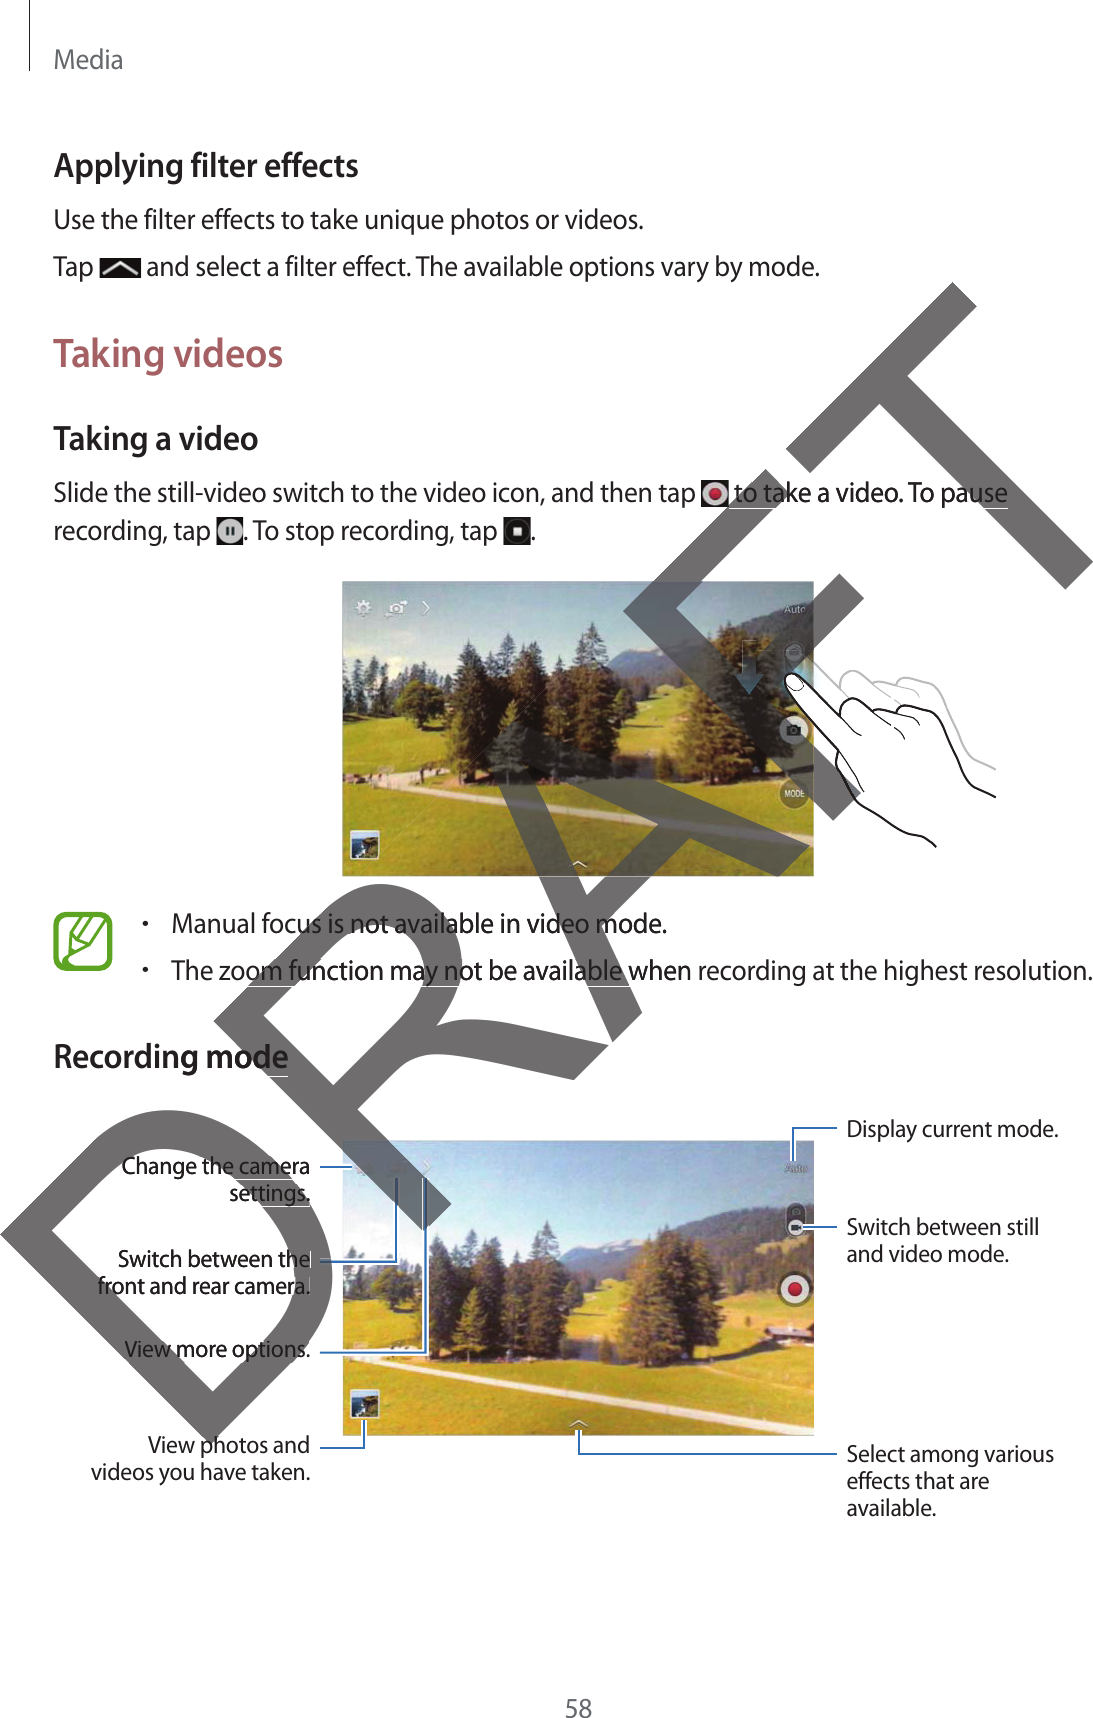 Media58Applying filter effectsUse the filter effects to take unique photos or videos.Tap   and select a filter effect. The available options vary by mode.Taking videosTaking a videoSlide the still-video switch to the video icon, and then tap   to take a video. To pause recording, tap  . To stop recording, tap  .rManual focus is not available in video mode.rThe zoom function may not be available when recording at the highest resolution.Recording modeSwitch between the front and rear camera.View photos and videos you have taken. Select among various effects that are available.Change the camera settings.View more options.Display current mode.Switch between still and video mode.DphphDRAFT to take a video. To pause  to take a video. To pause FFFFFFAFAFFFFFAFFus is not available in video mode.us is not available in video mom function may not be available when om function may not be available wing modeodeDRDRDRDRRRSwitch between thehe front and rear camera.front and rear camera.Change the cameraChange the camesettings.ettings.View more options.View more options.